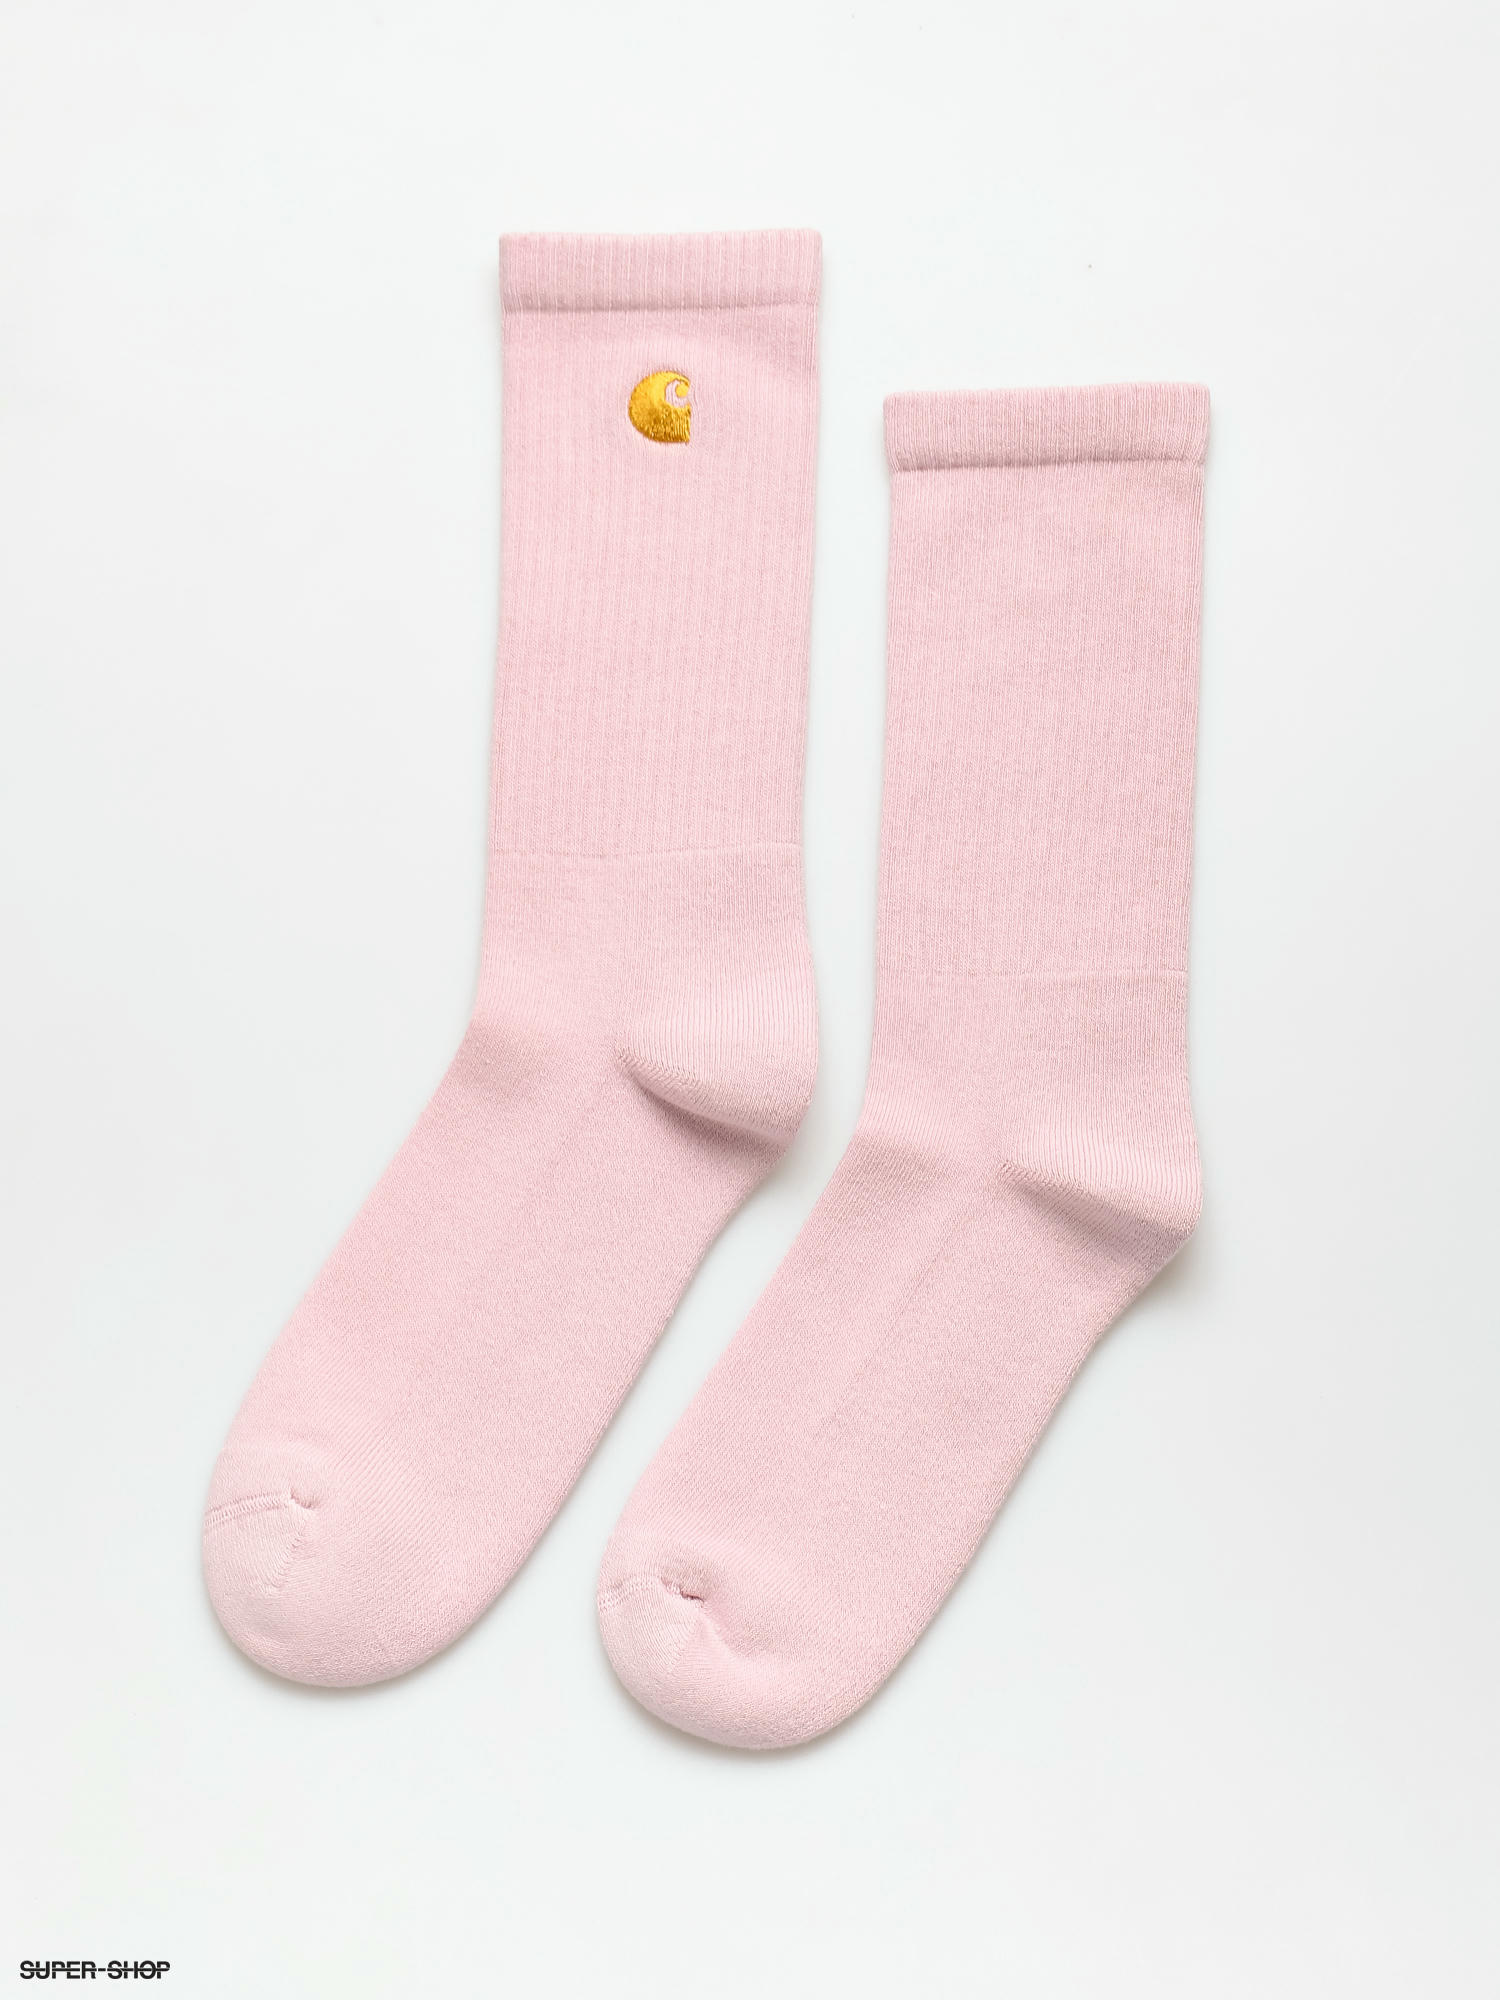 Carhartt girls Cozy Crew Socks With Grippers 2-pair